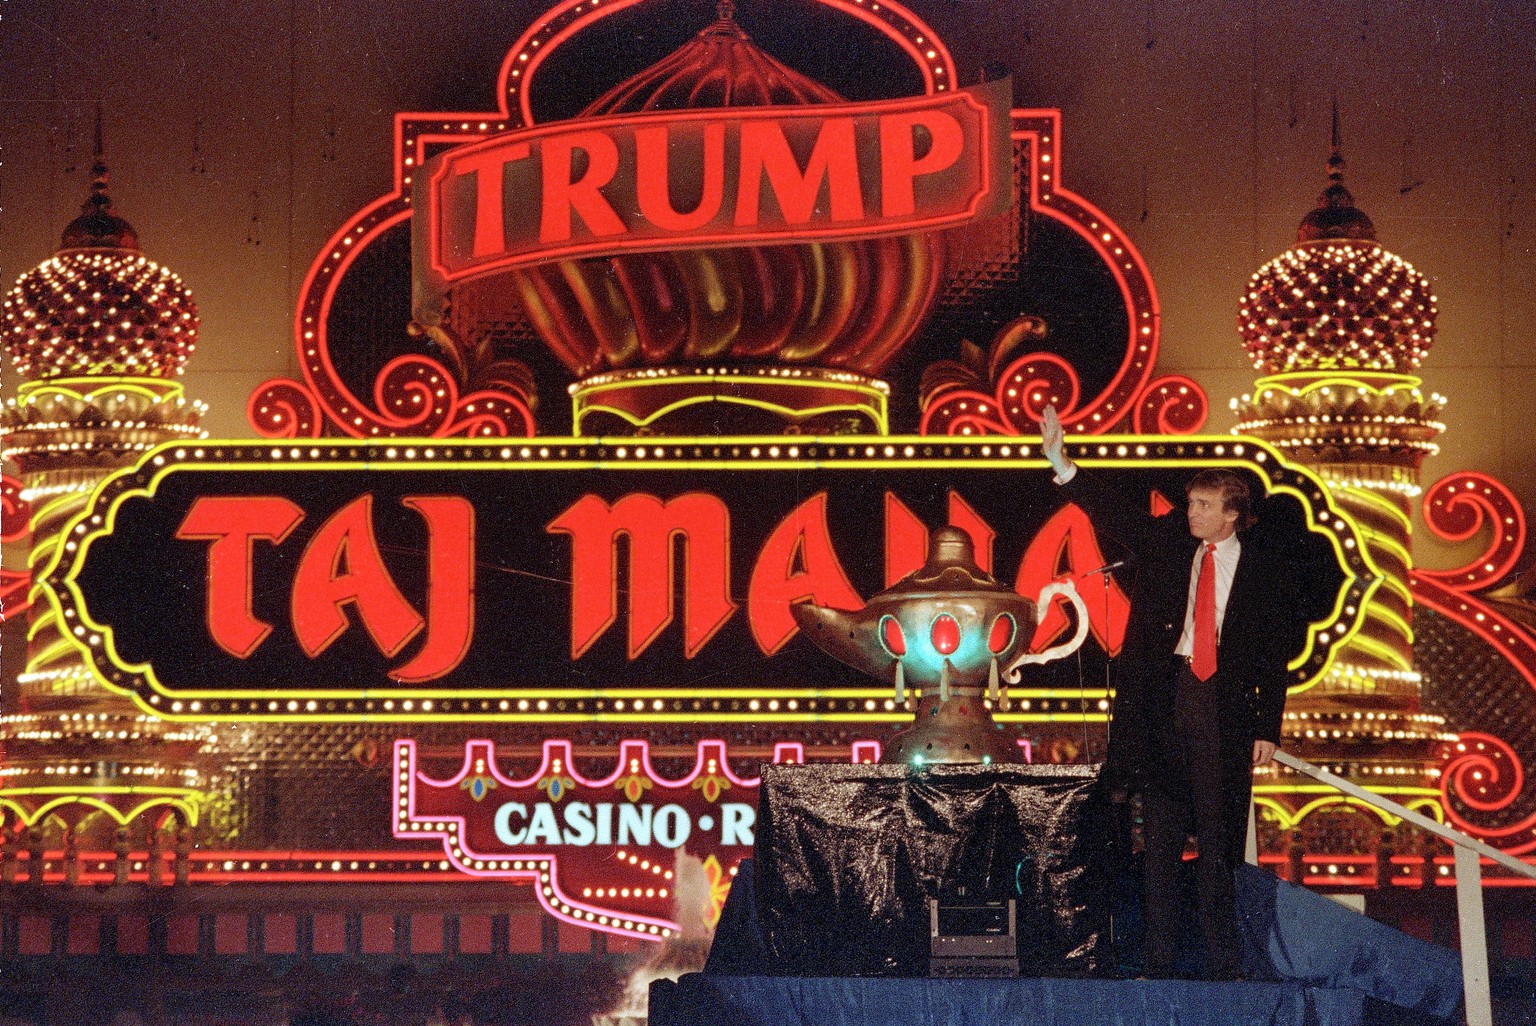 FILE - In this April 5, 1990 file photo, Donald Trump stands next to a genie lamp as the lights of his Trump Taj Mahal Casino Resort light up the evening sky marking the grand opening of the venture i ...